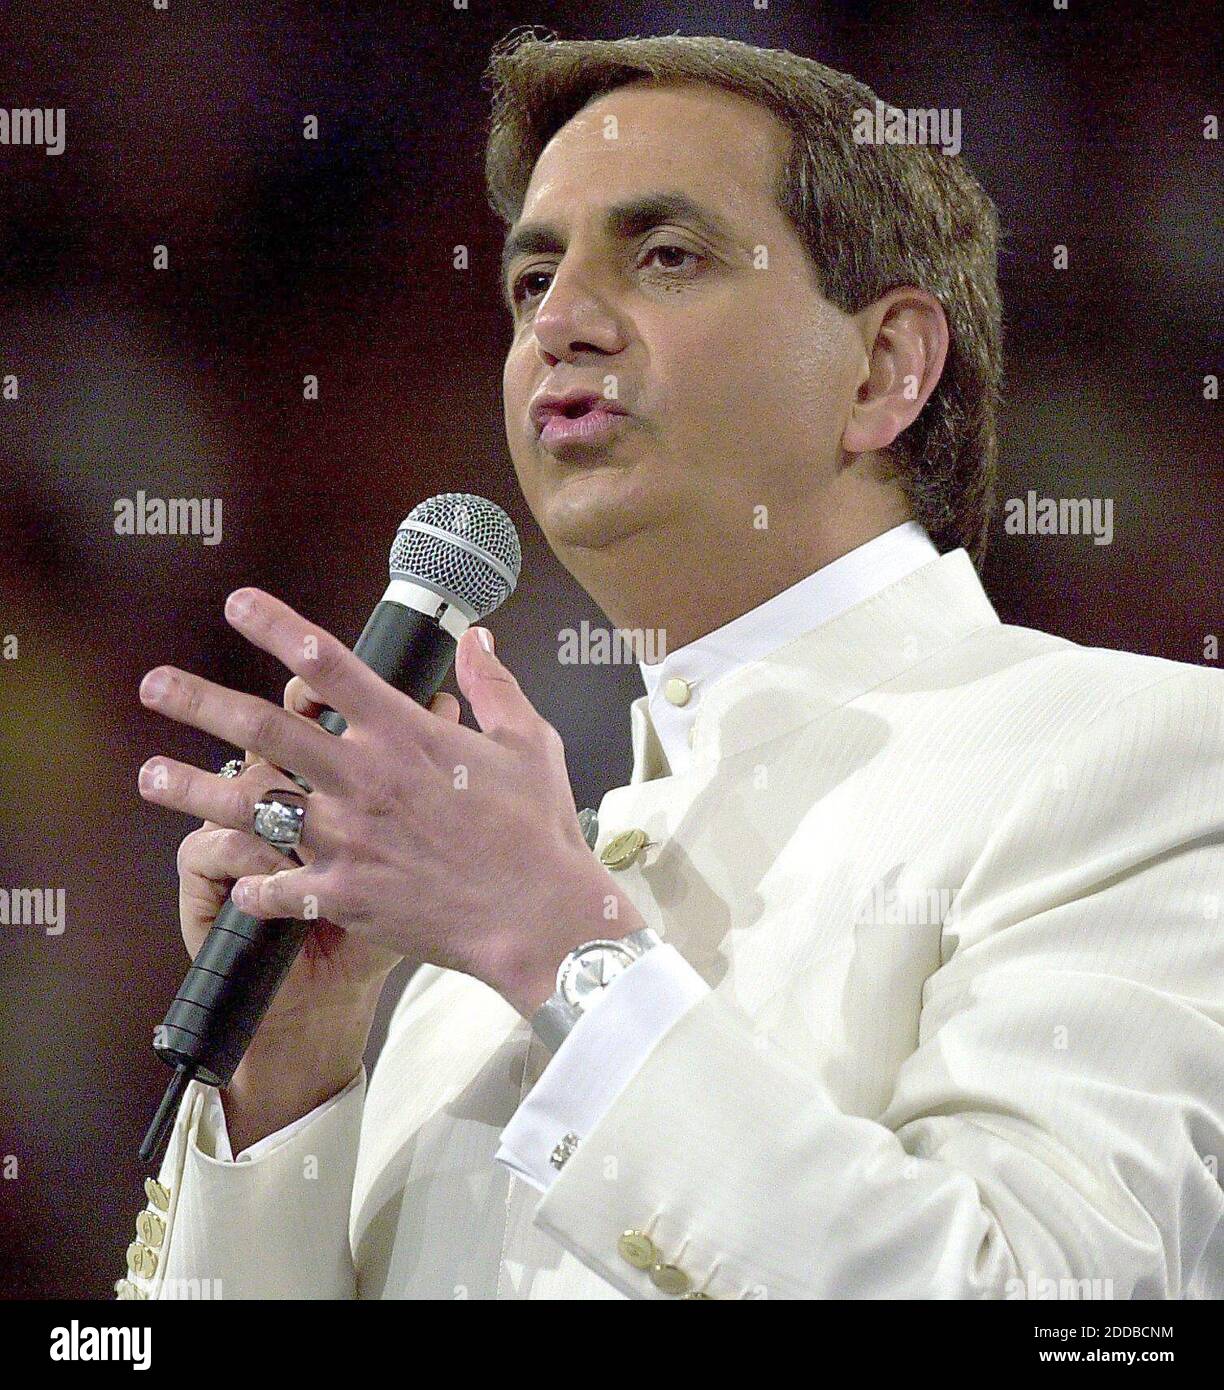 Benny hinn hi-res stock photography and images - Alamy